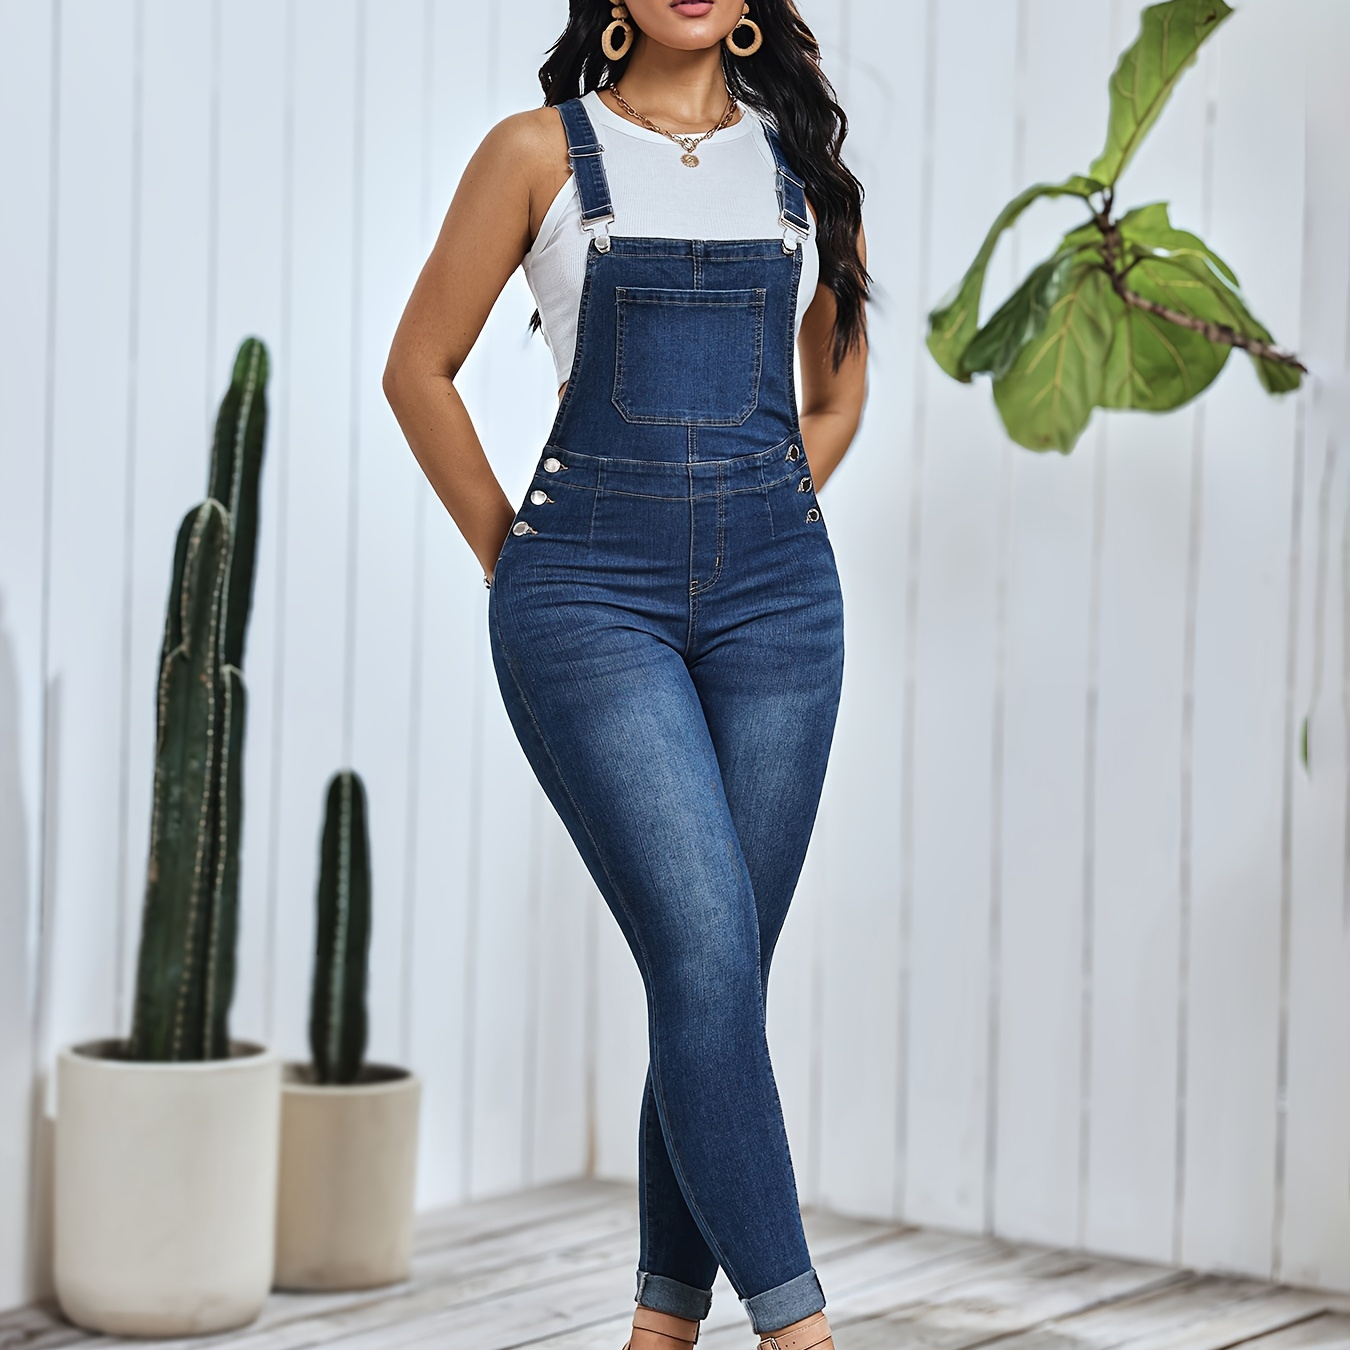 

Women's Skinny Fit Overalls, High Elasticity Fabric, Soft And Comfortable, Cuffed Design, Long Length, Casual Preppy Style, Versatile Mid-blue Washed Denim Overalls Dungarees